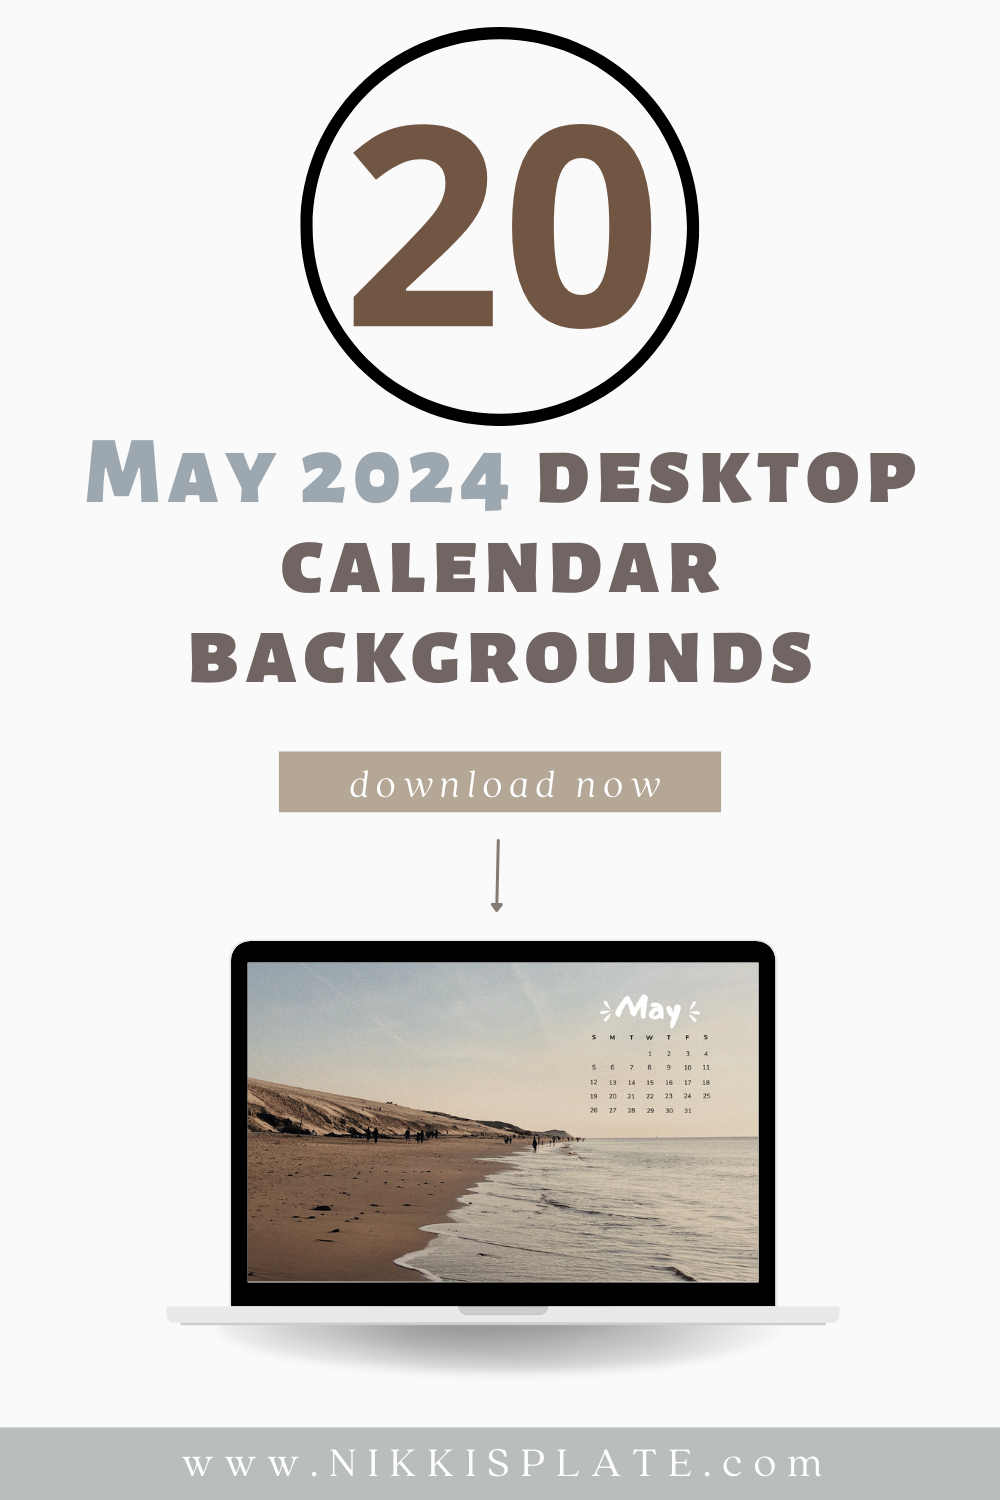 Free May 2024 Desktop Calendar Backgrounds; Here are your free May backgrounds for computers and laptops. Tech freebies for this month!